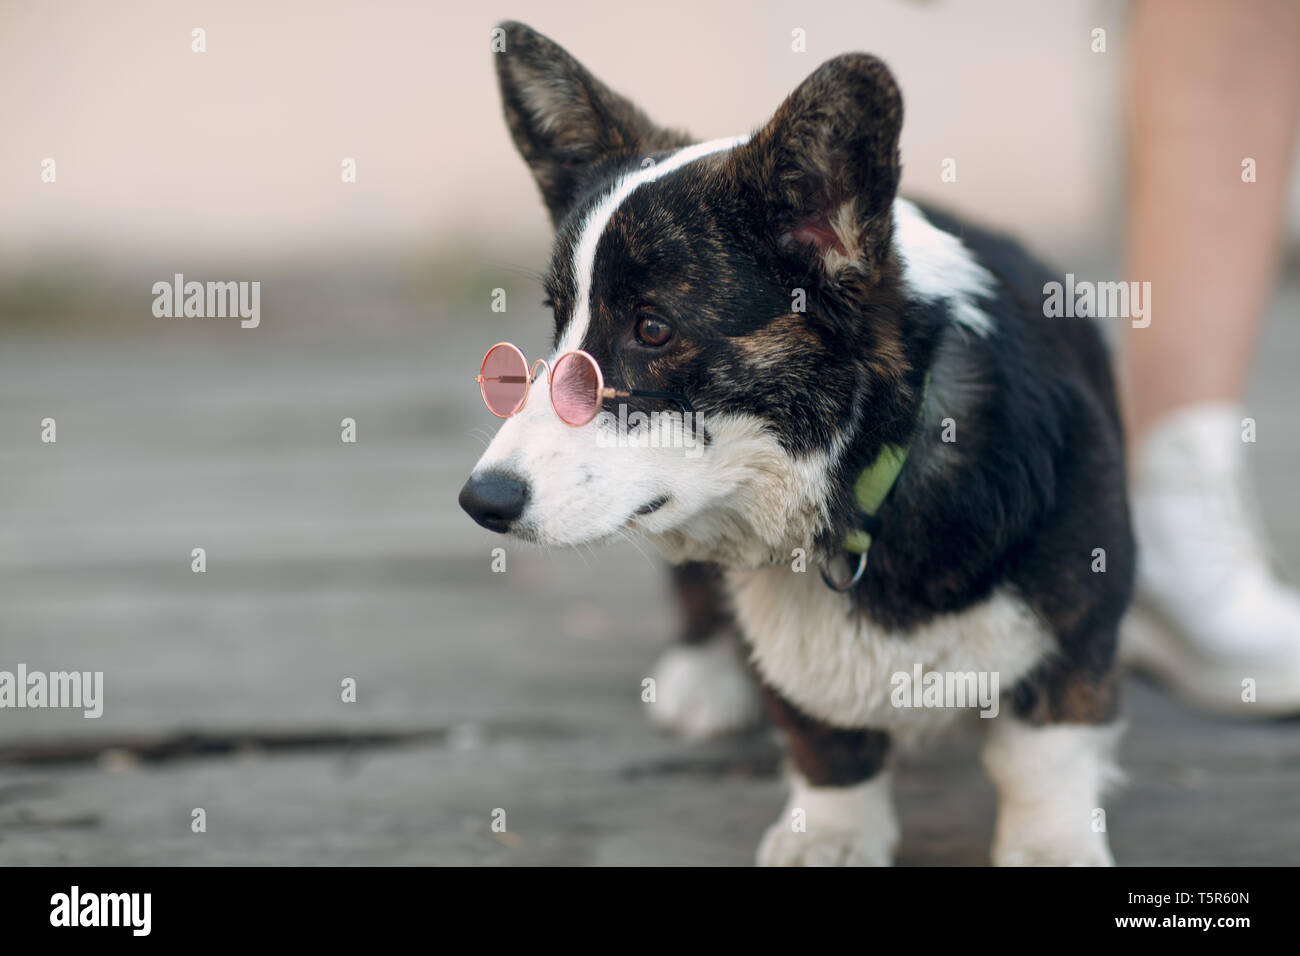 Corgi welsh cardigan puppy dog in pink goggles glasses Stock Photo